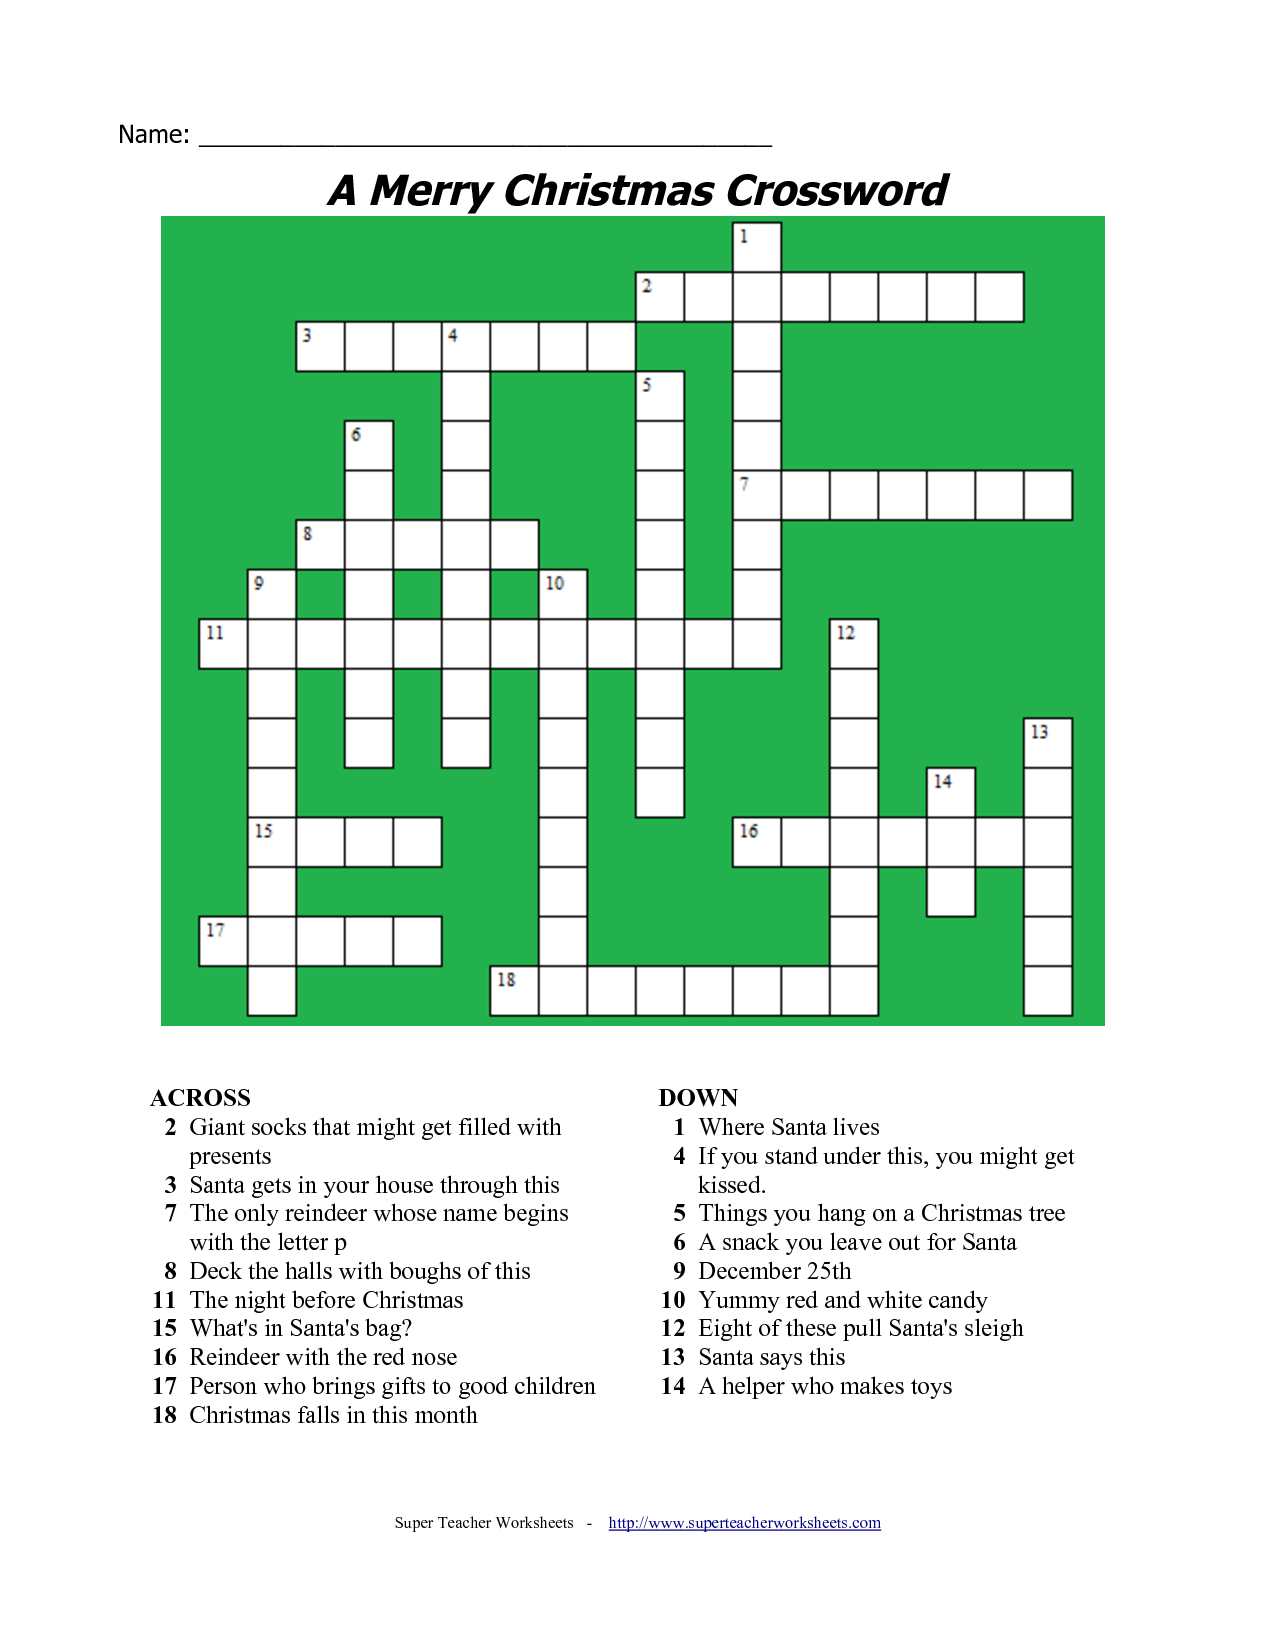 free-printable-christmas-crossword-puzzles-for-adults